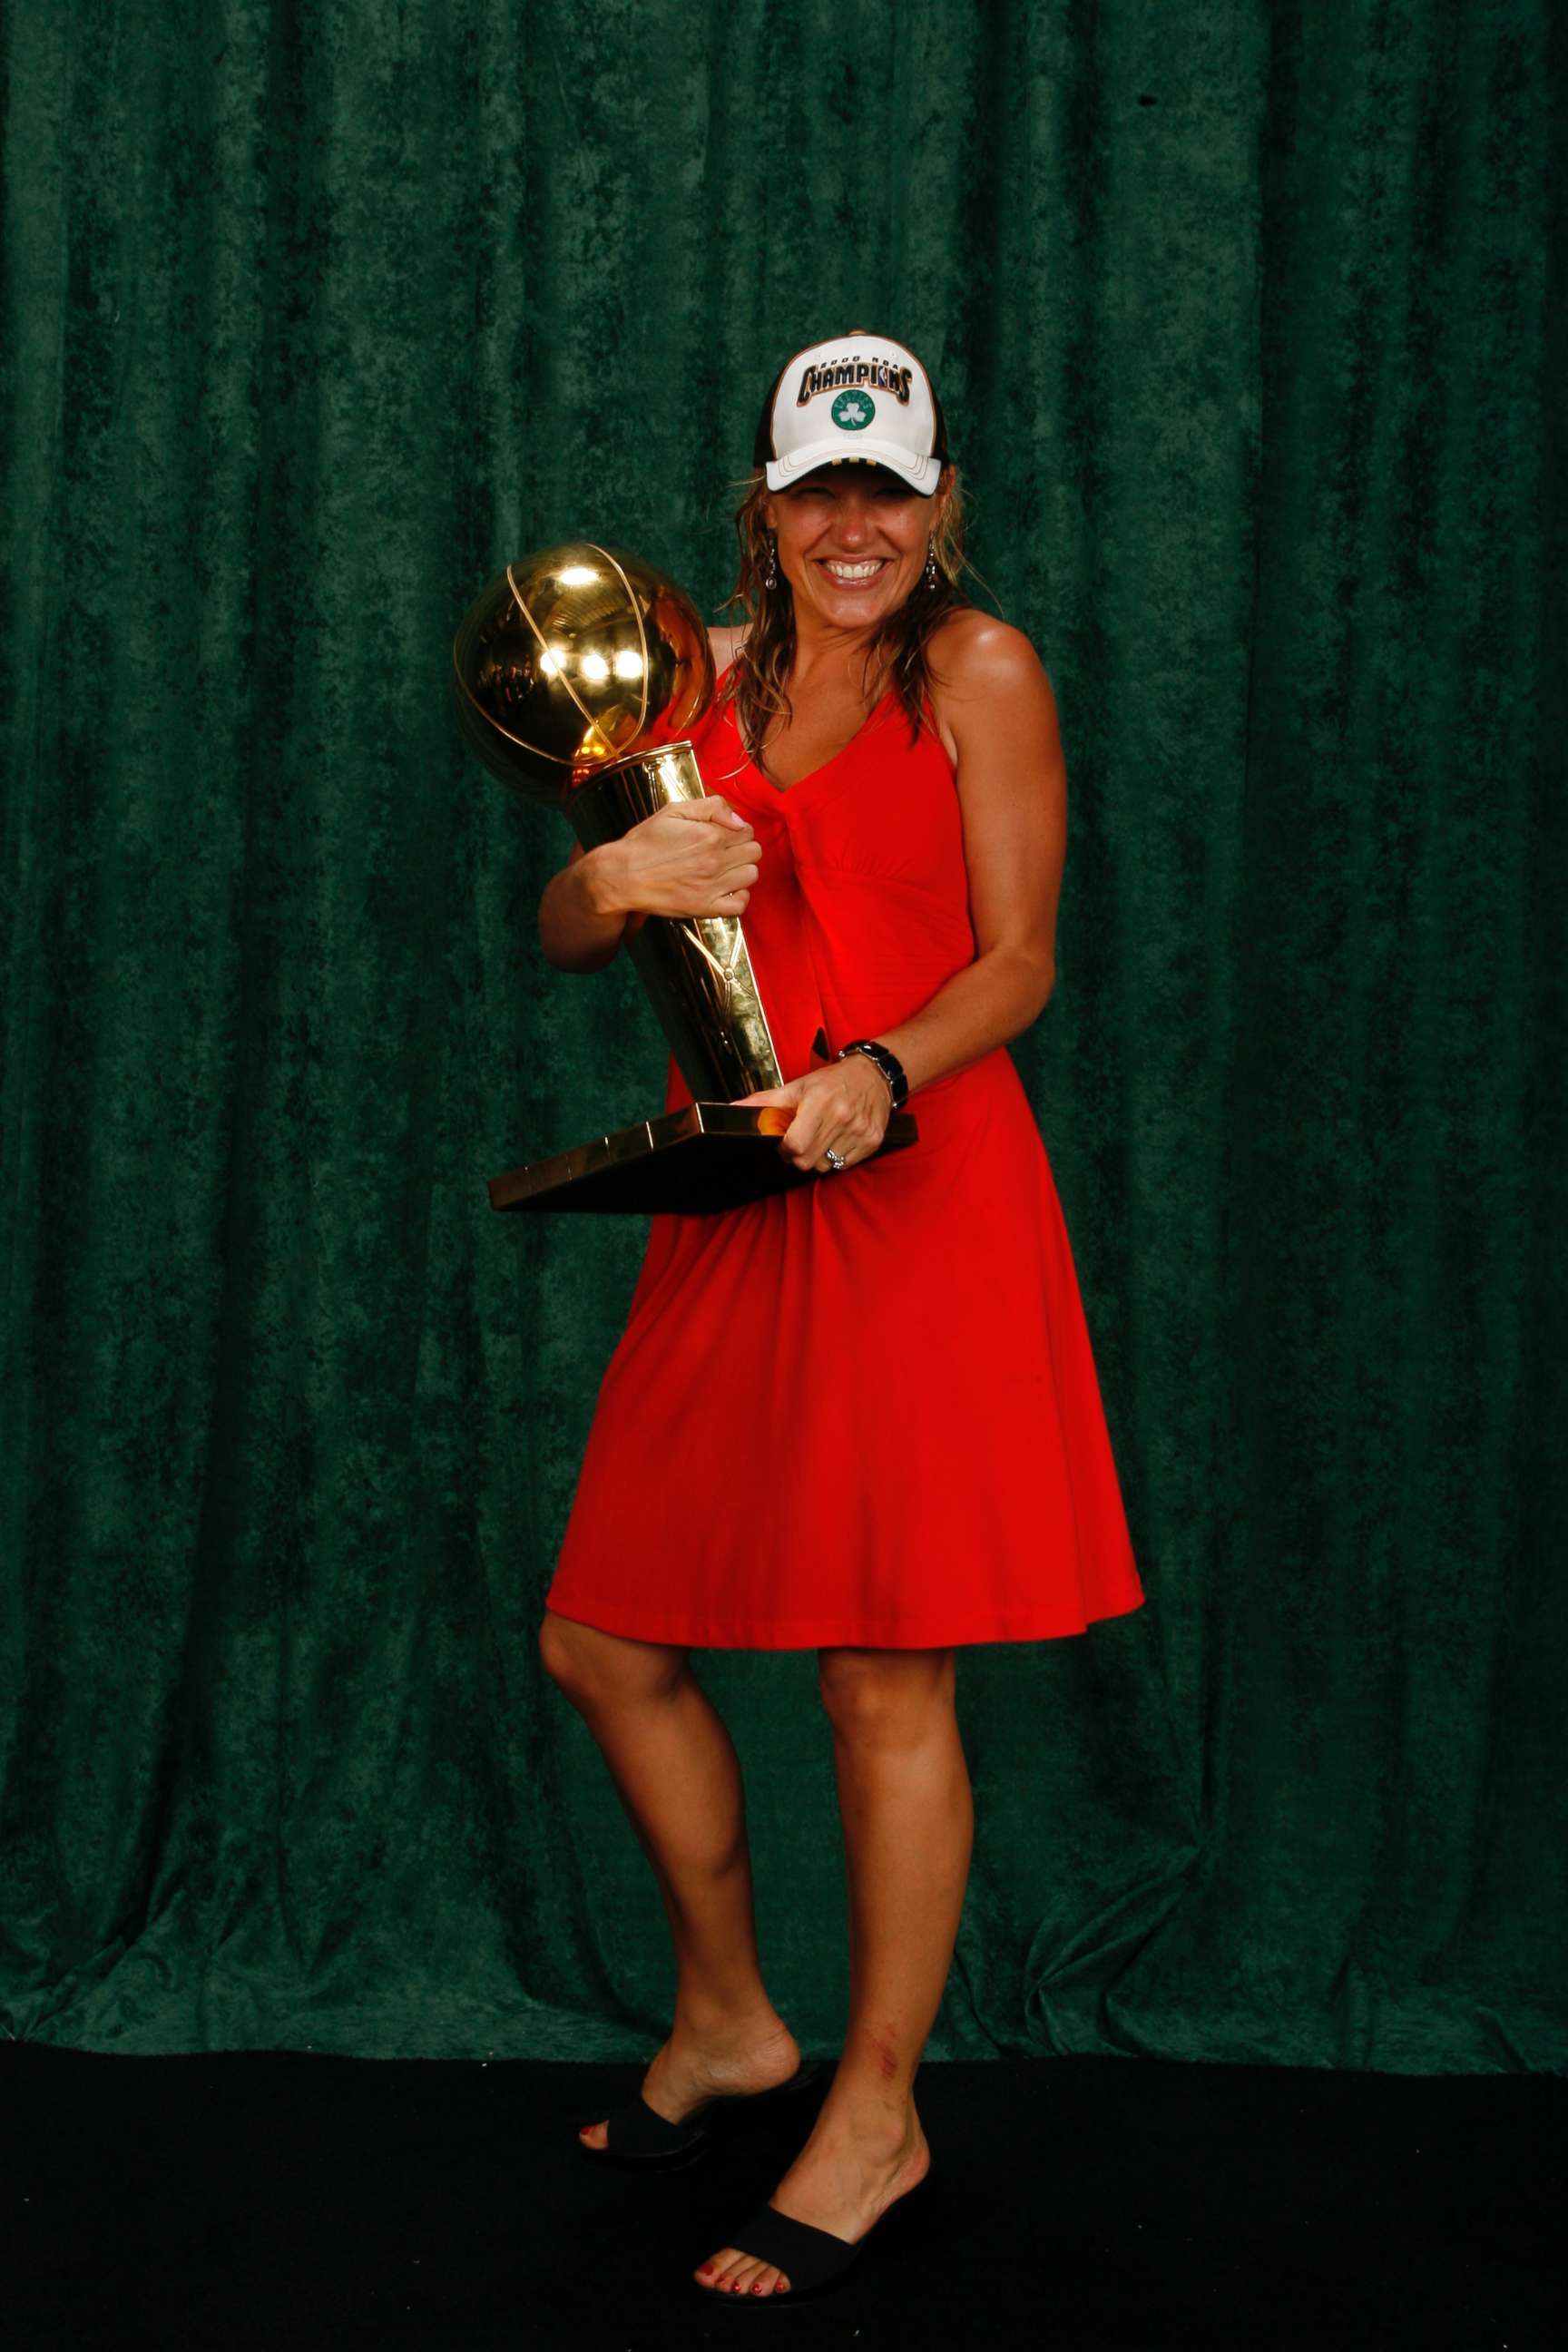 PHOTO: Heather Walker, a vice-president of public relations for the Boston Celtics, poses with the NBA Championship Trophy in 2008.